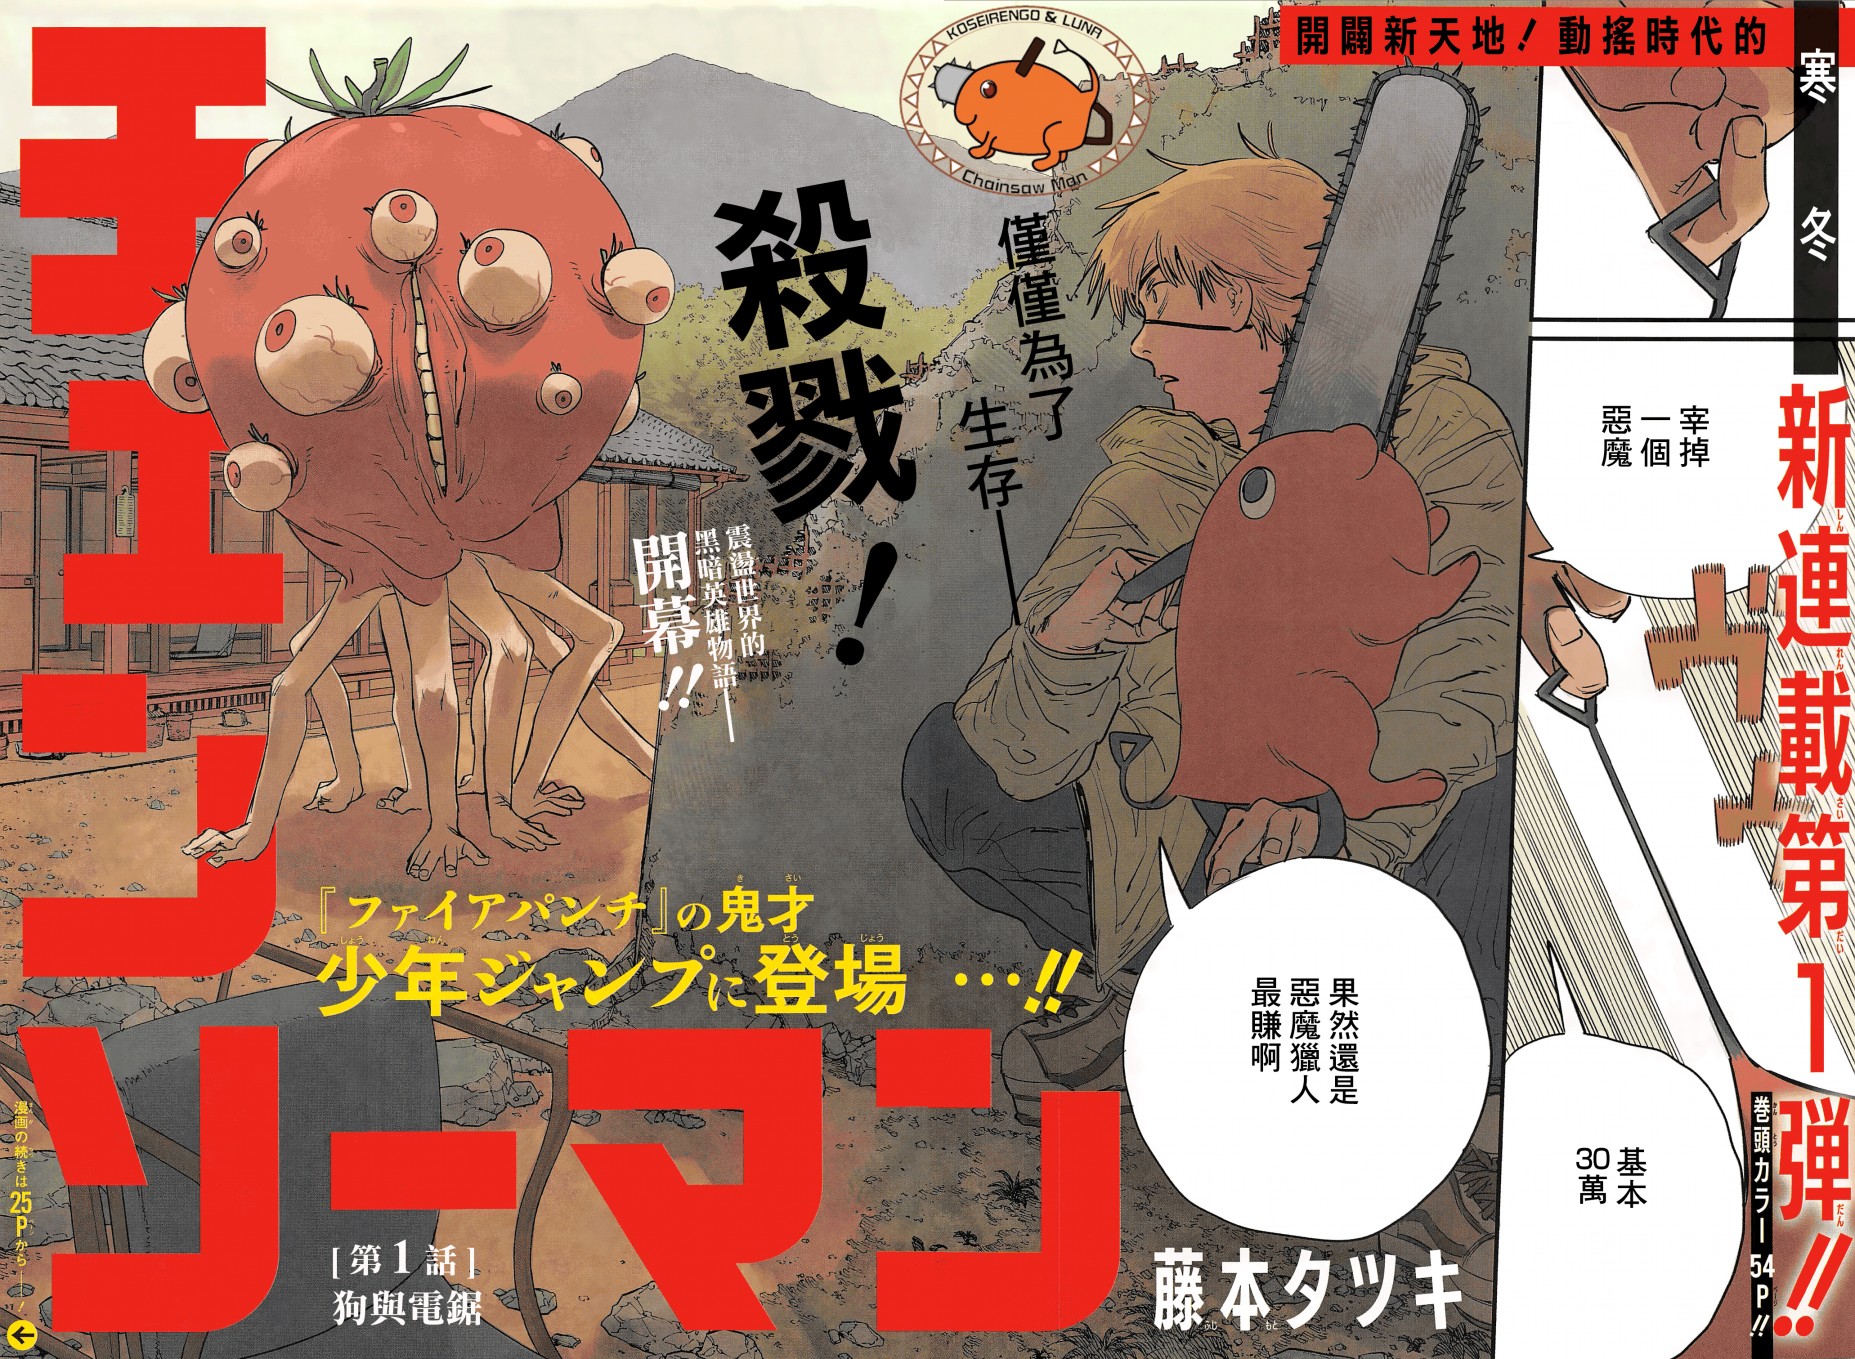 Análise: TOC Weekly Shonen Jump #04-05 (Ano 2019). - Analyse It